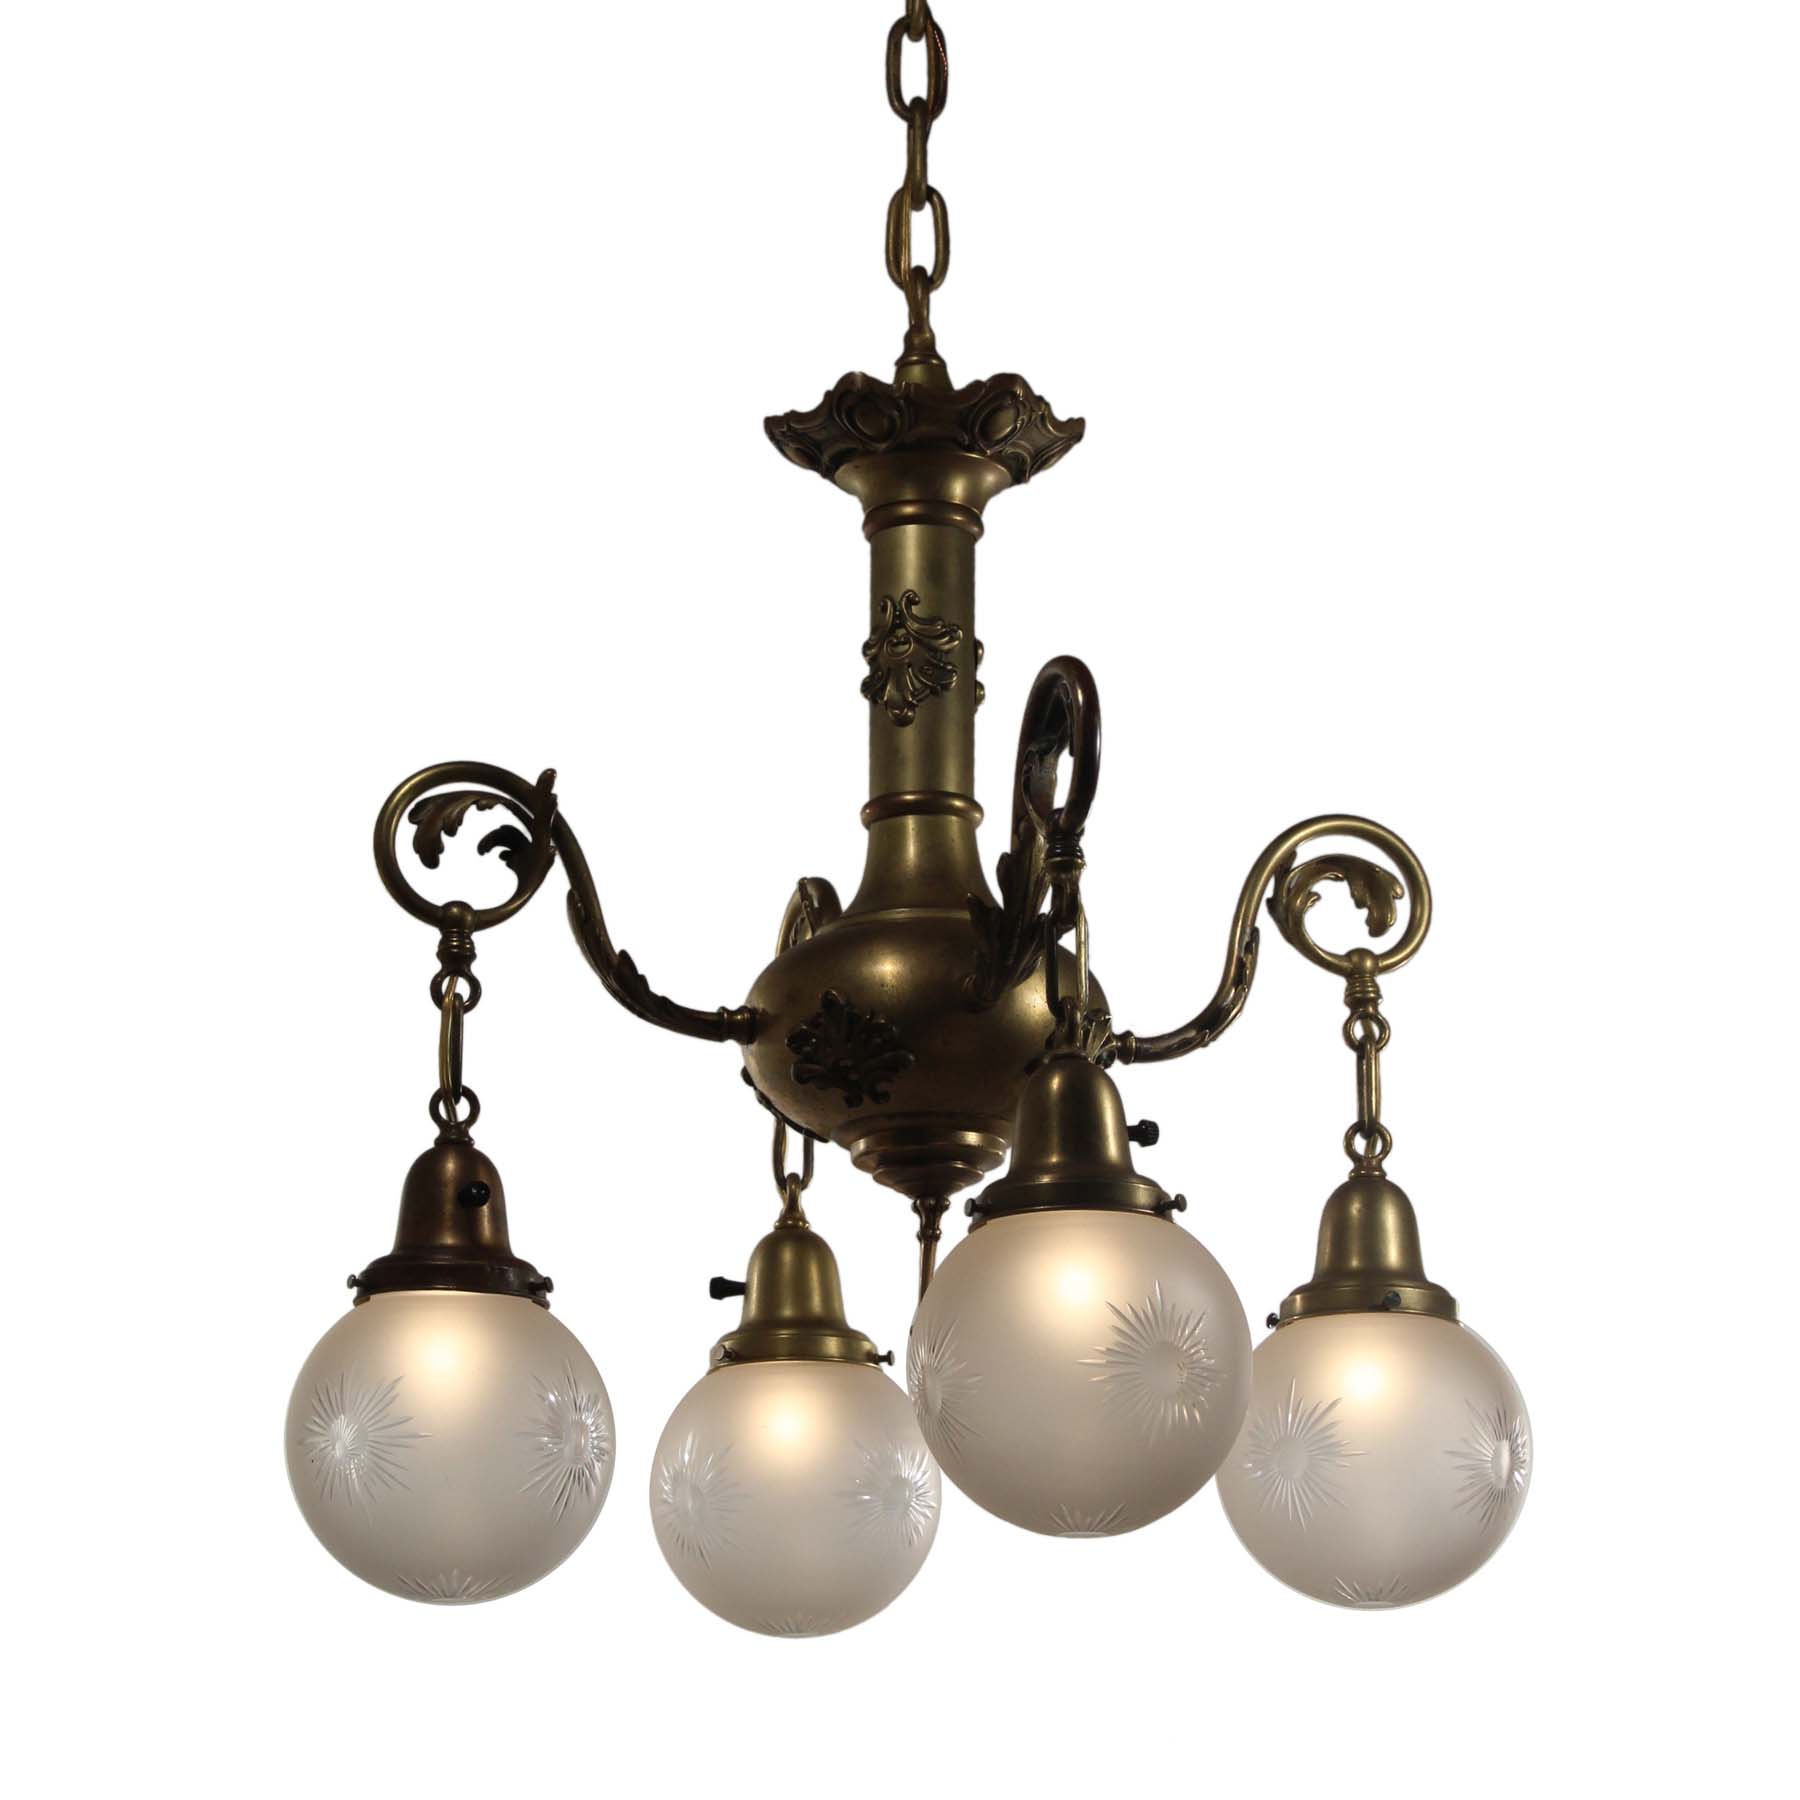 SOLD Neoclassical Chandelier with Wheel Cut Shades, Antique Lighting-0